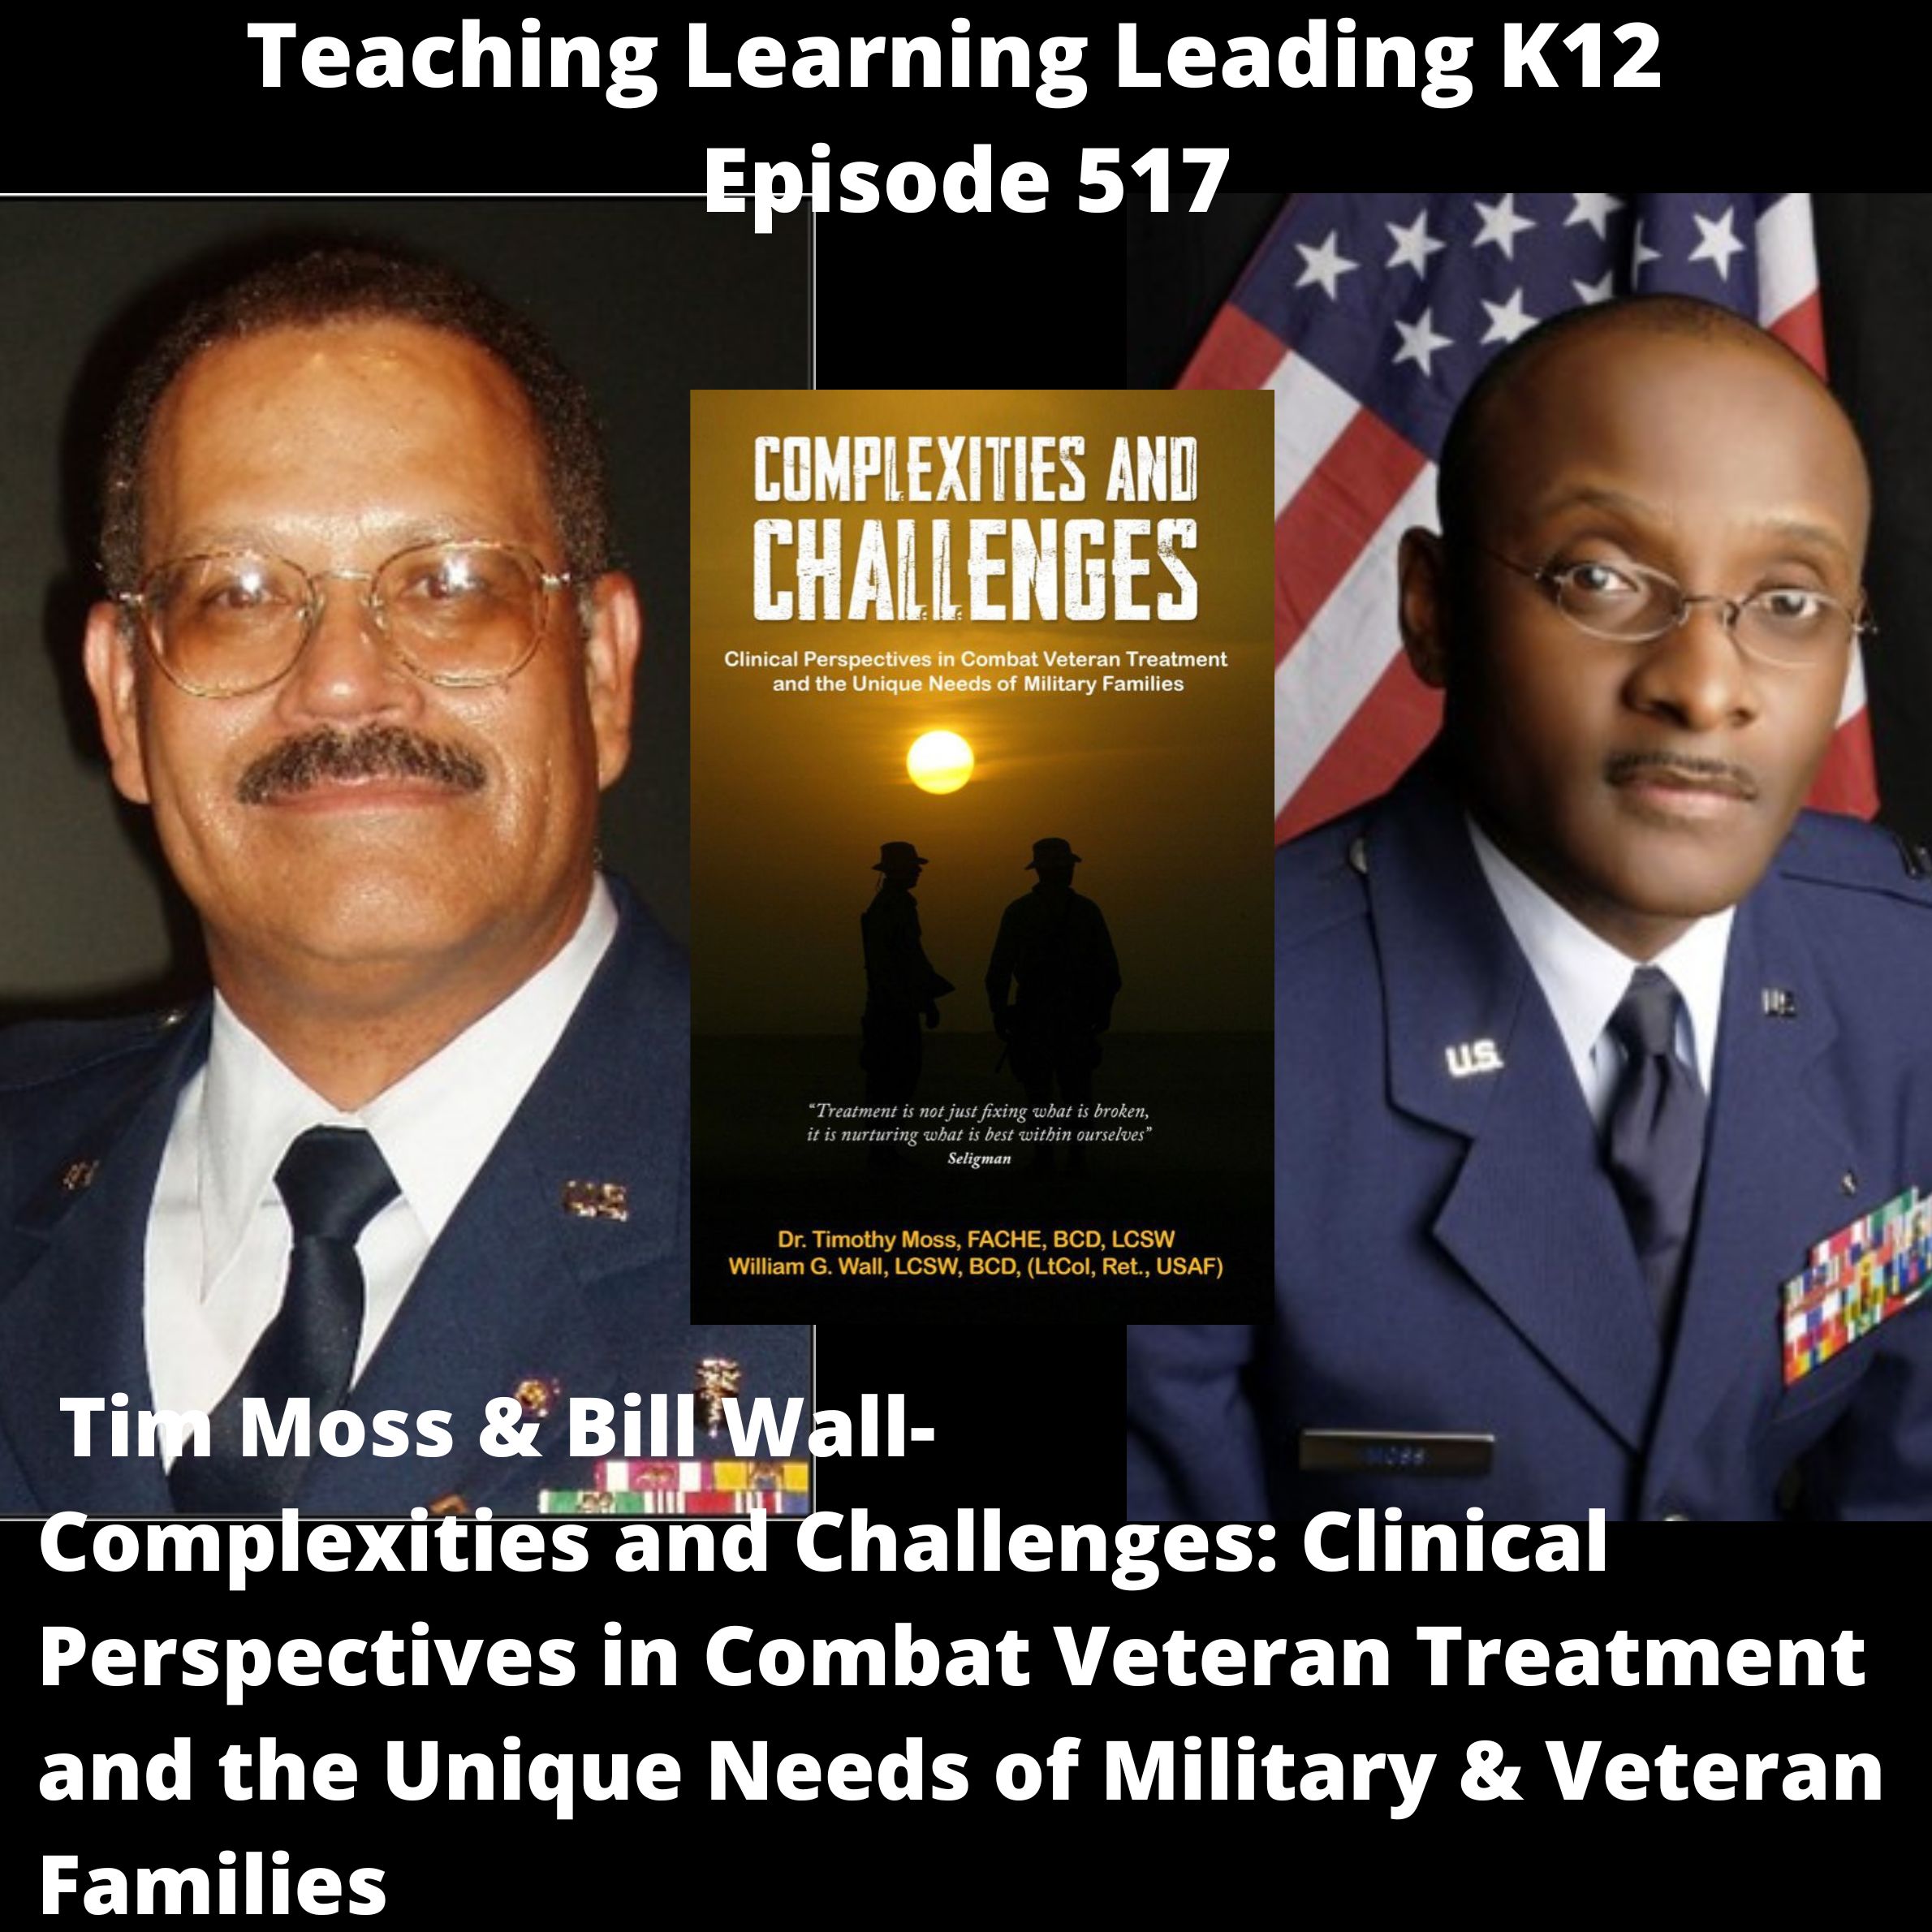 Tim Moss & Bill Wall - Complexities & Challenges: Clinical Perspectives in Combat Veteran Treatment and the Unique Needs of Military & Veteran Families - 517